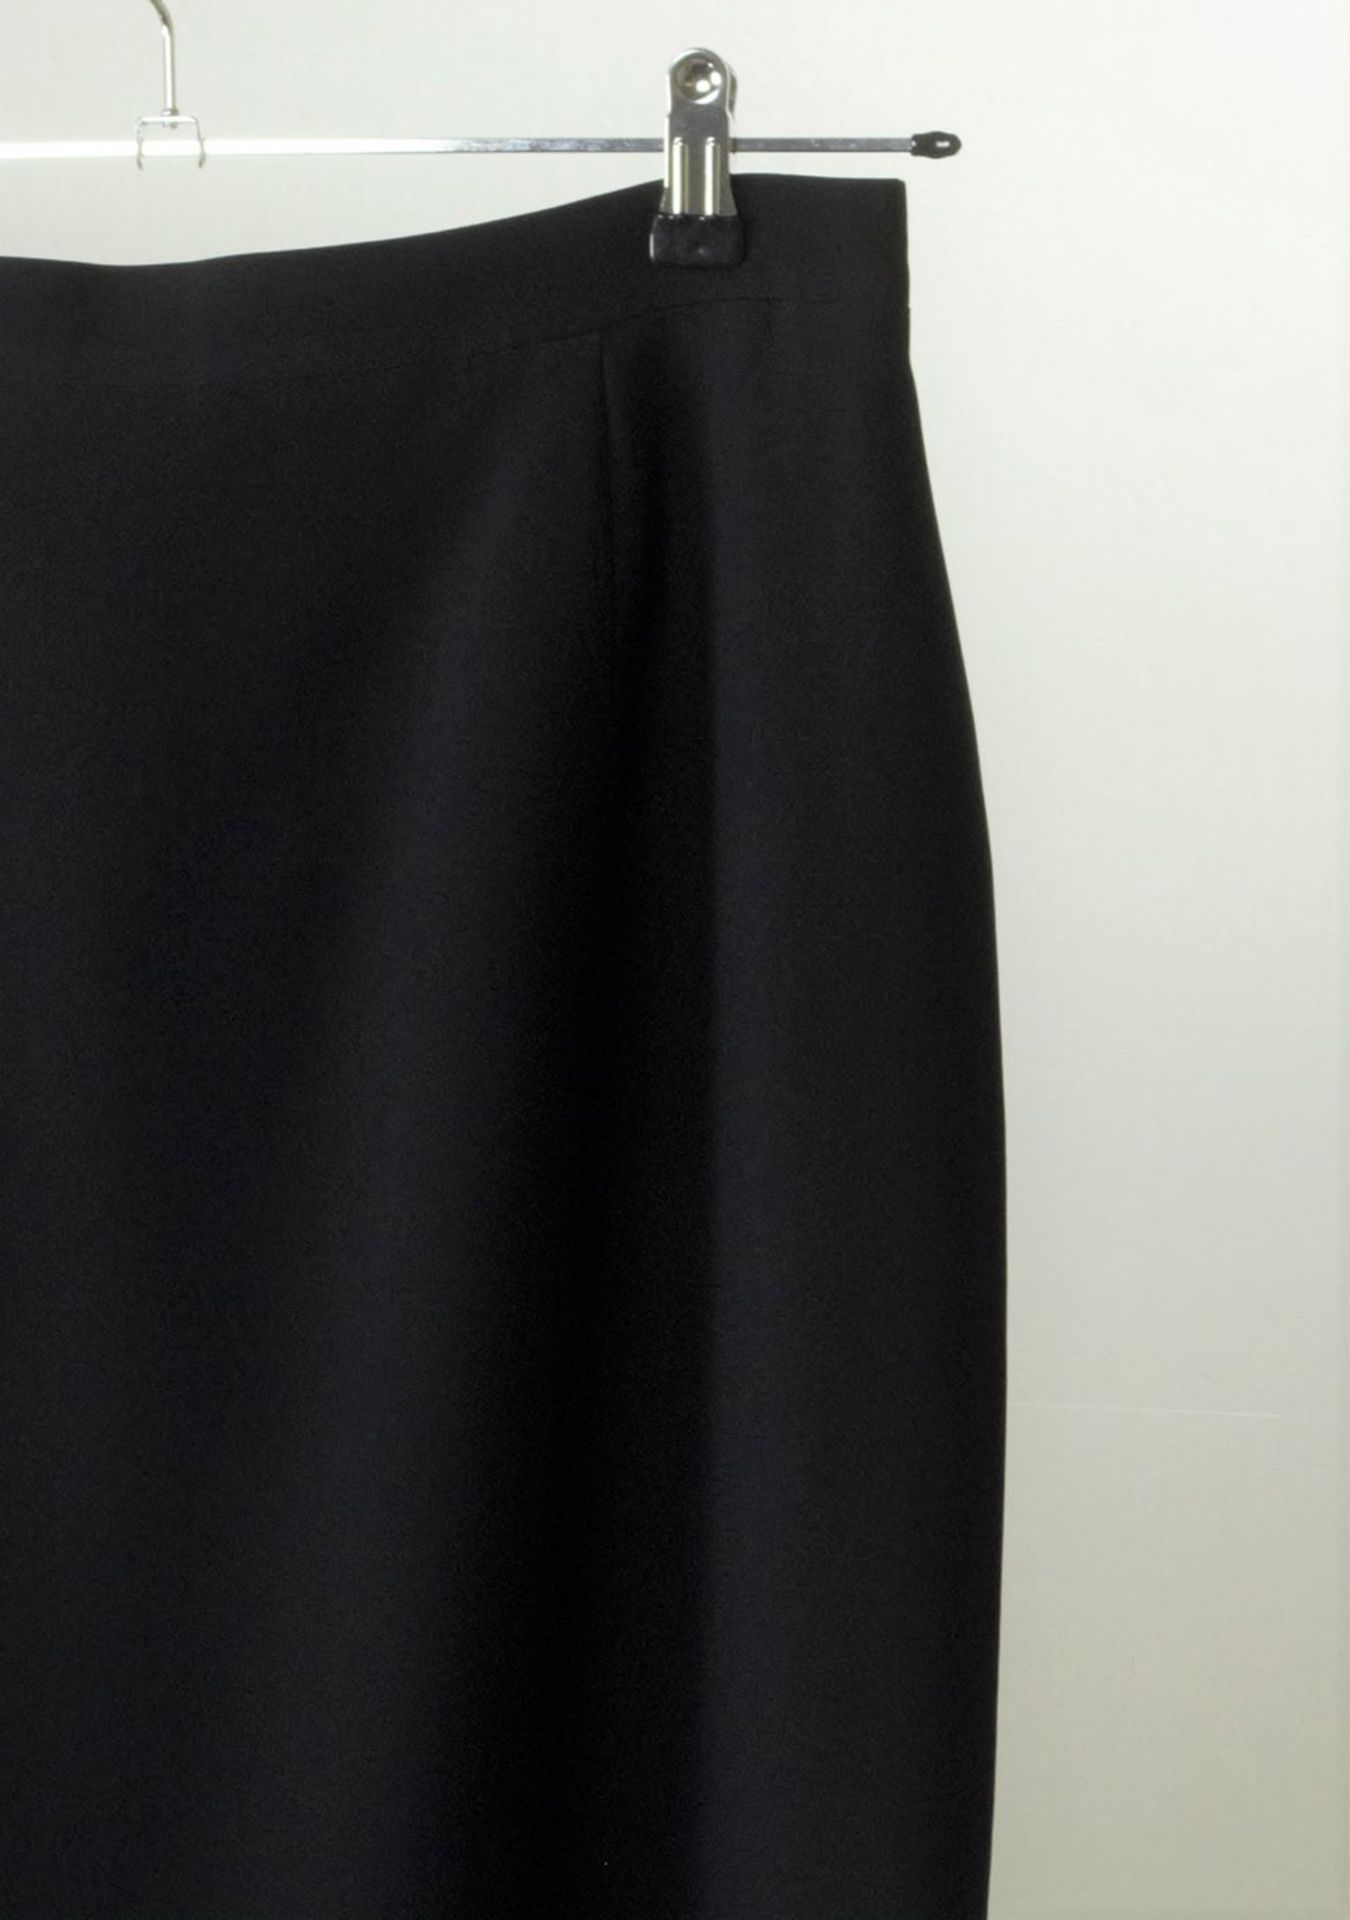 1 x Boutique Le Duc Black Maxi Pencil Skirt - From a High End Clothing Boutique In The - Image 2 of 3